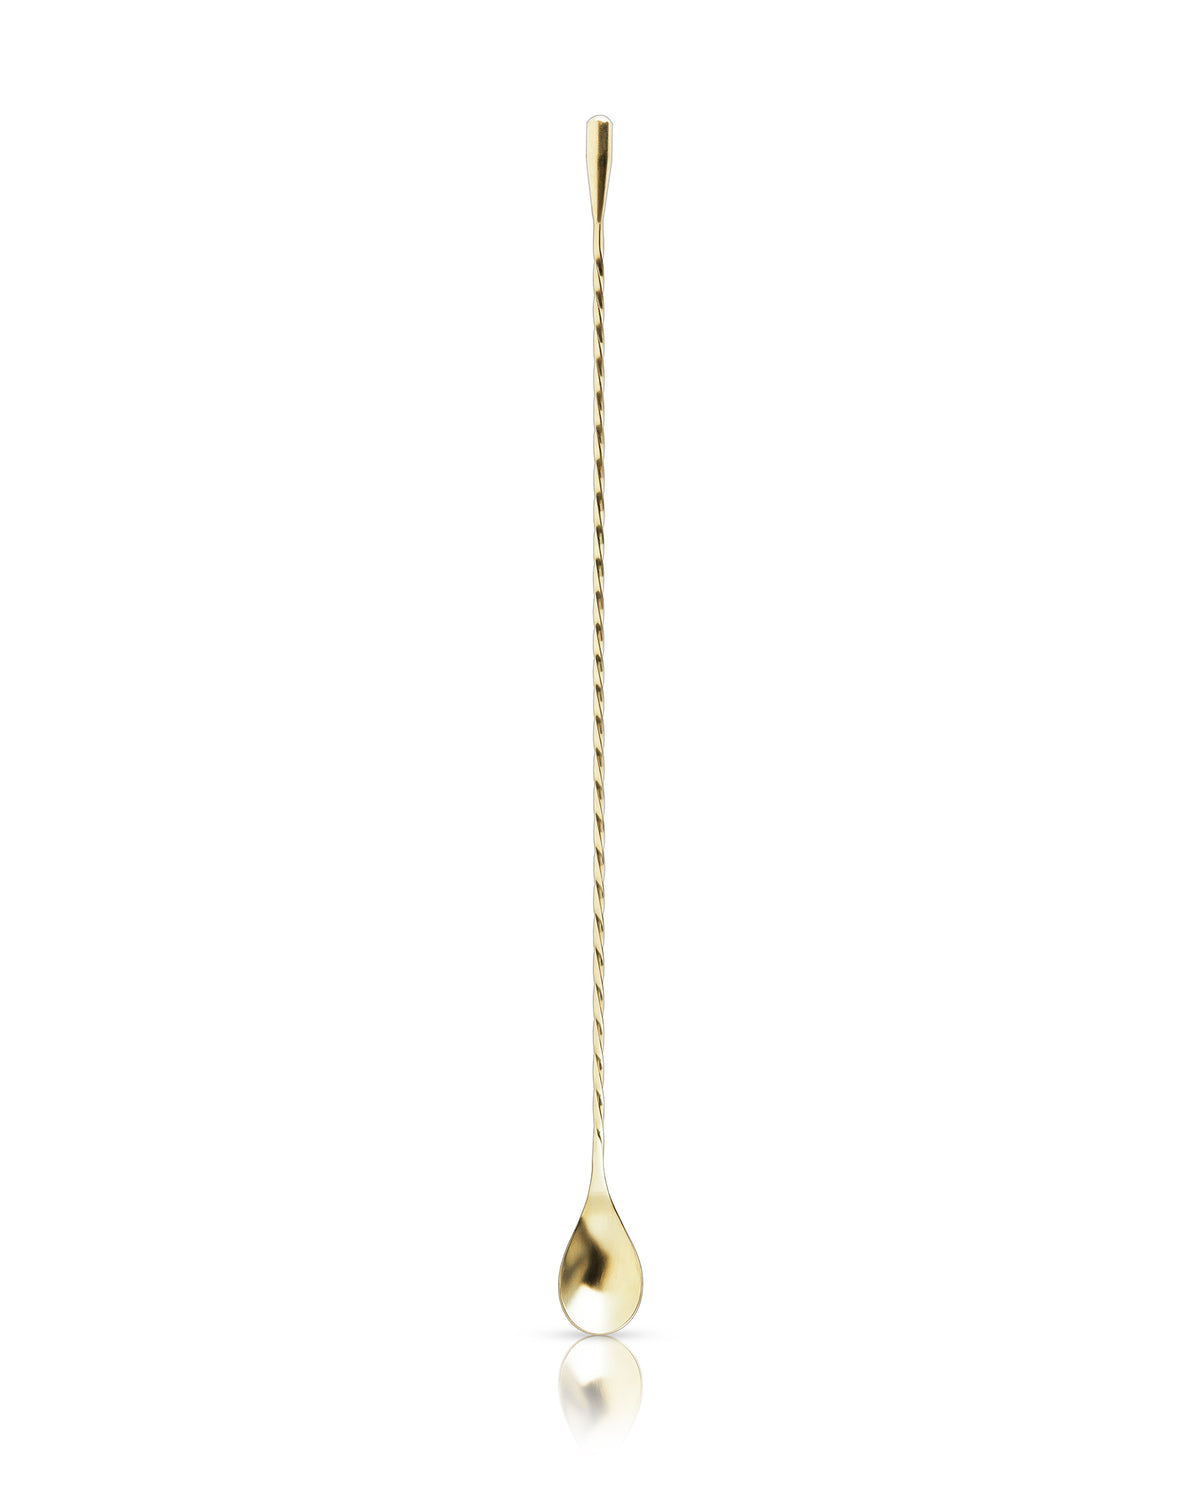 40Cm Gold Weighted Barspoon